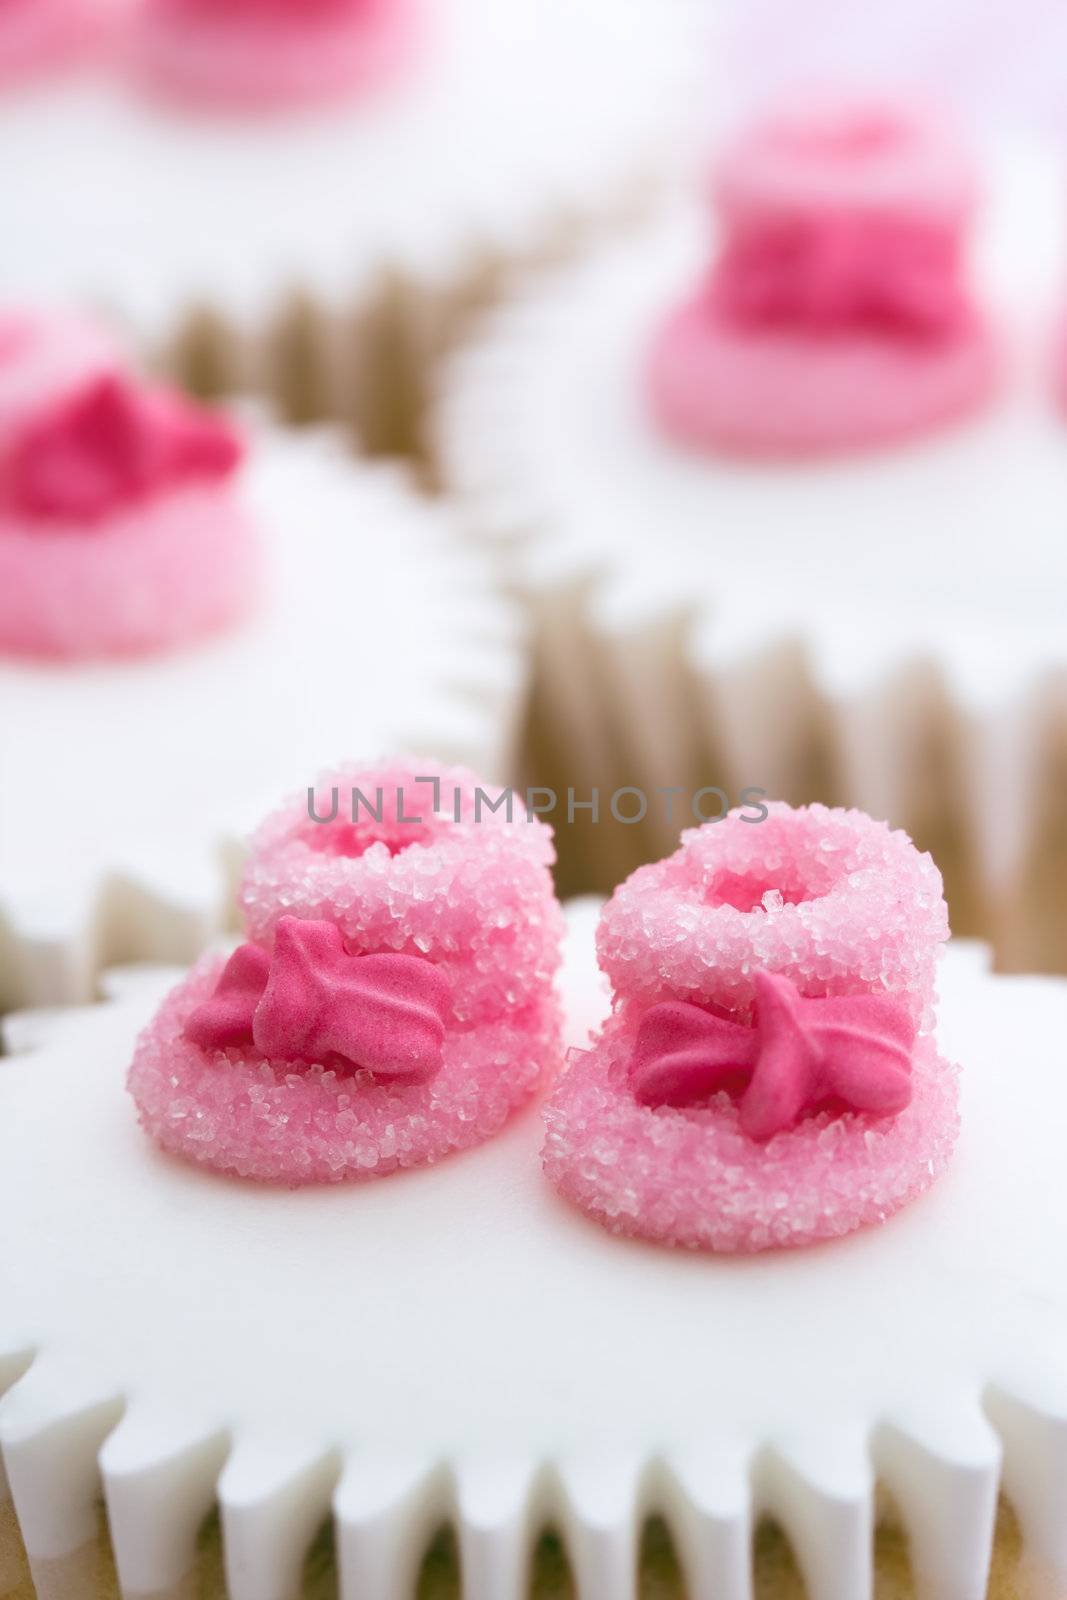 Cupcakes decorated with tiny pink sugar booties